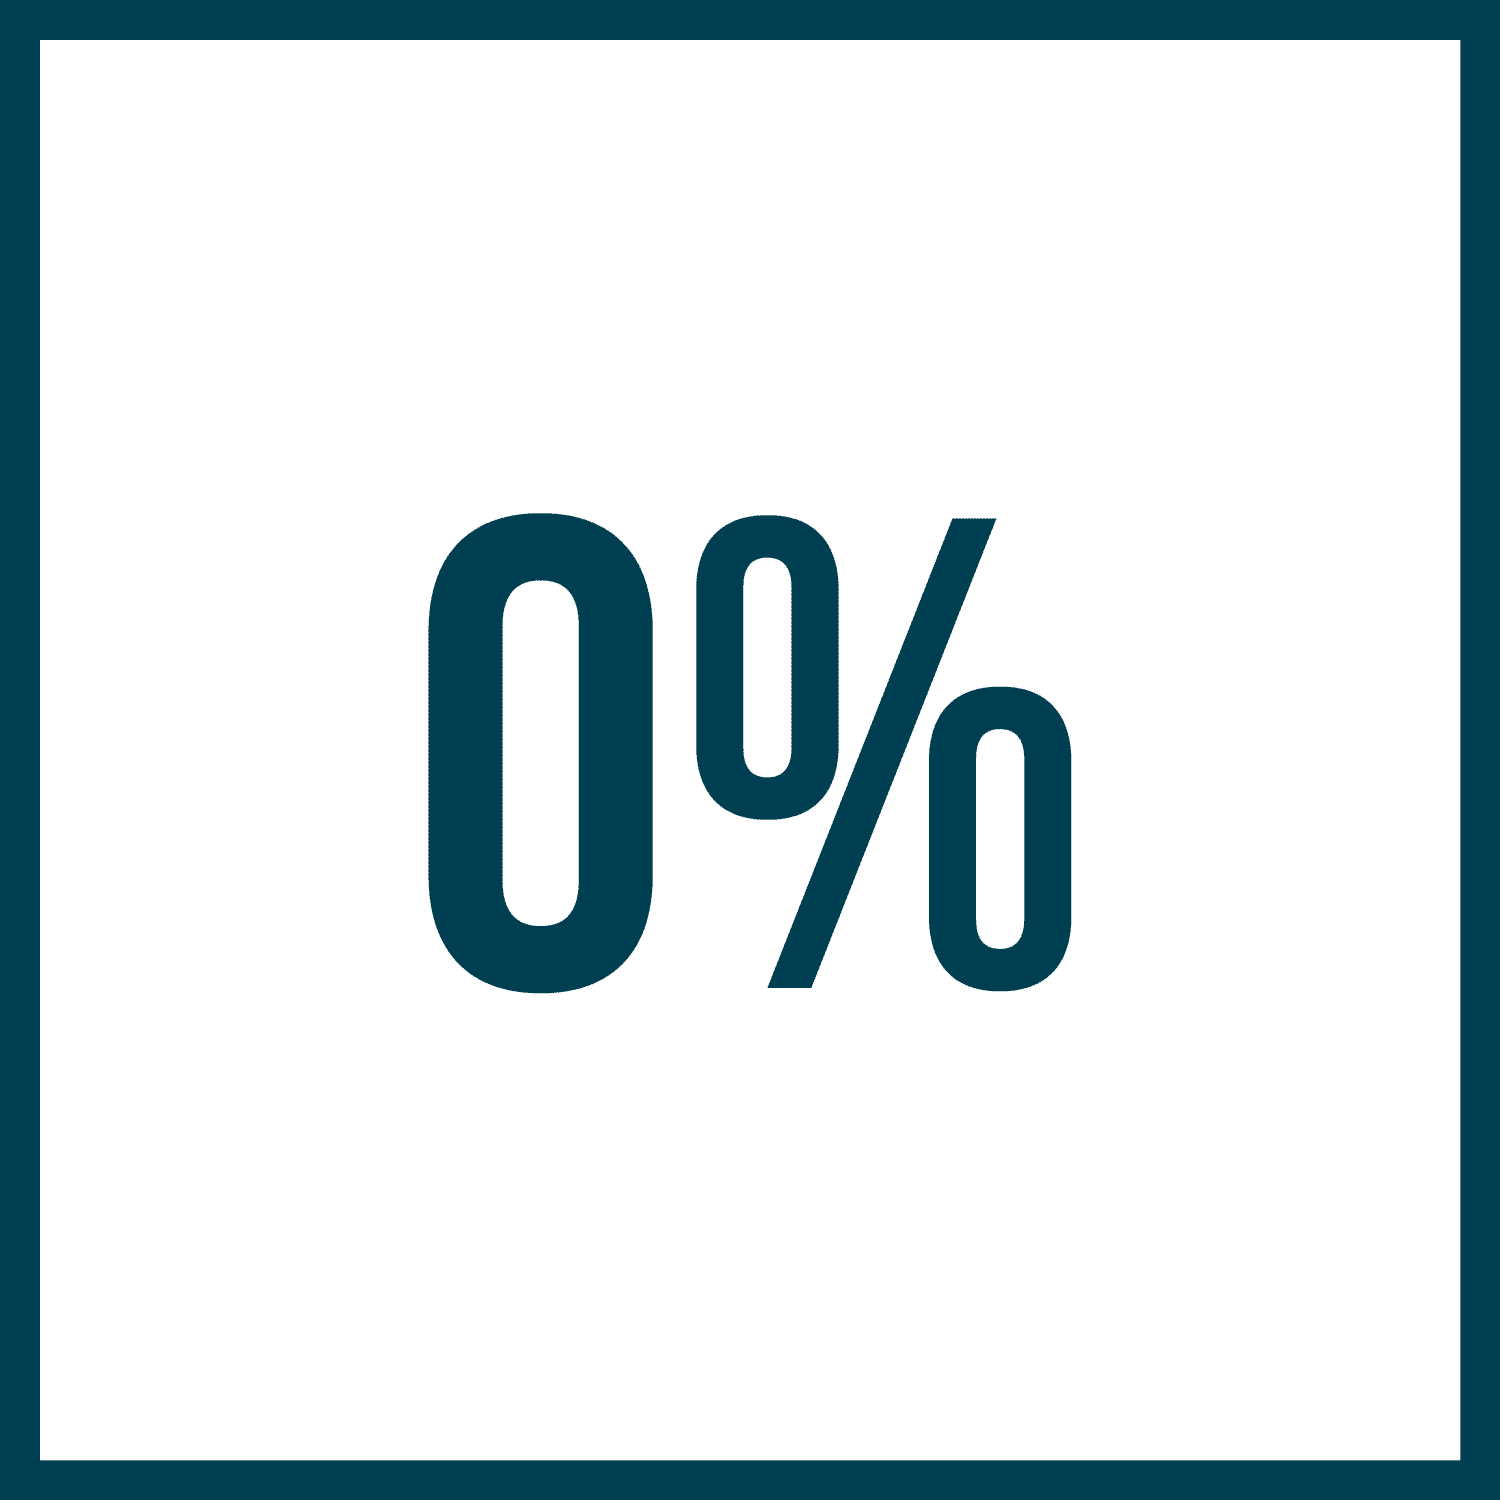 Blue Gif of percentages changing to get to 92%